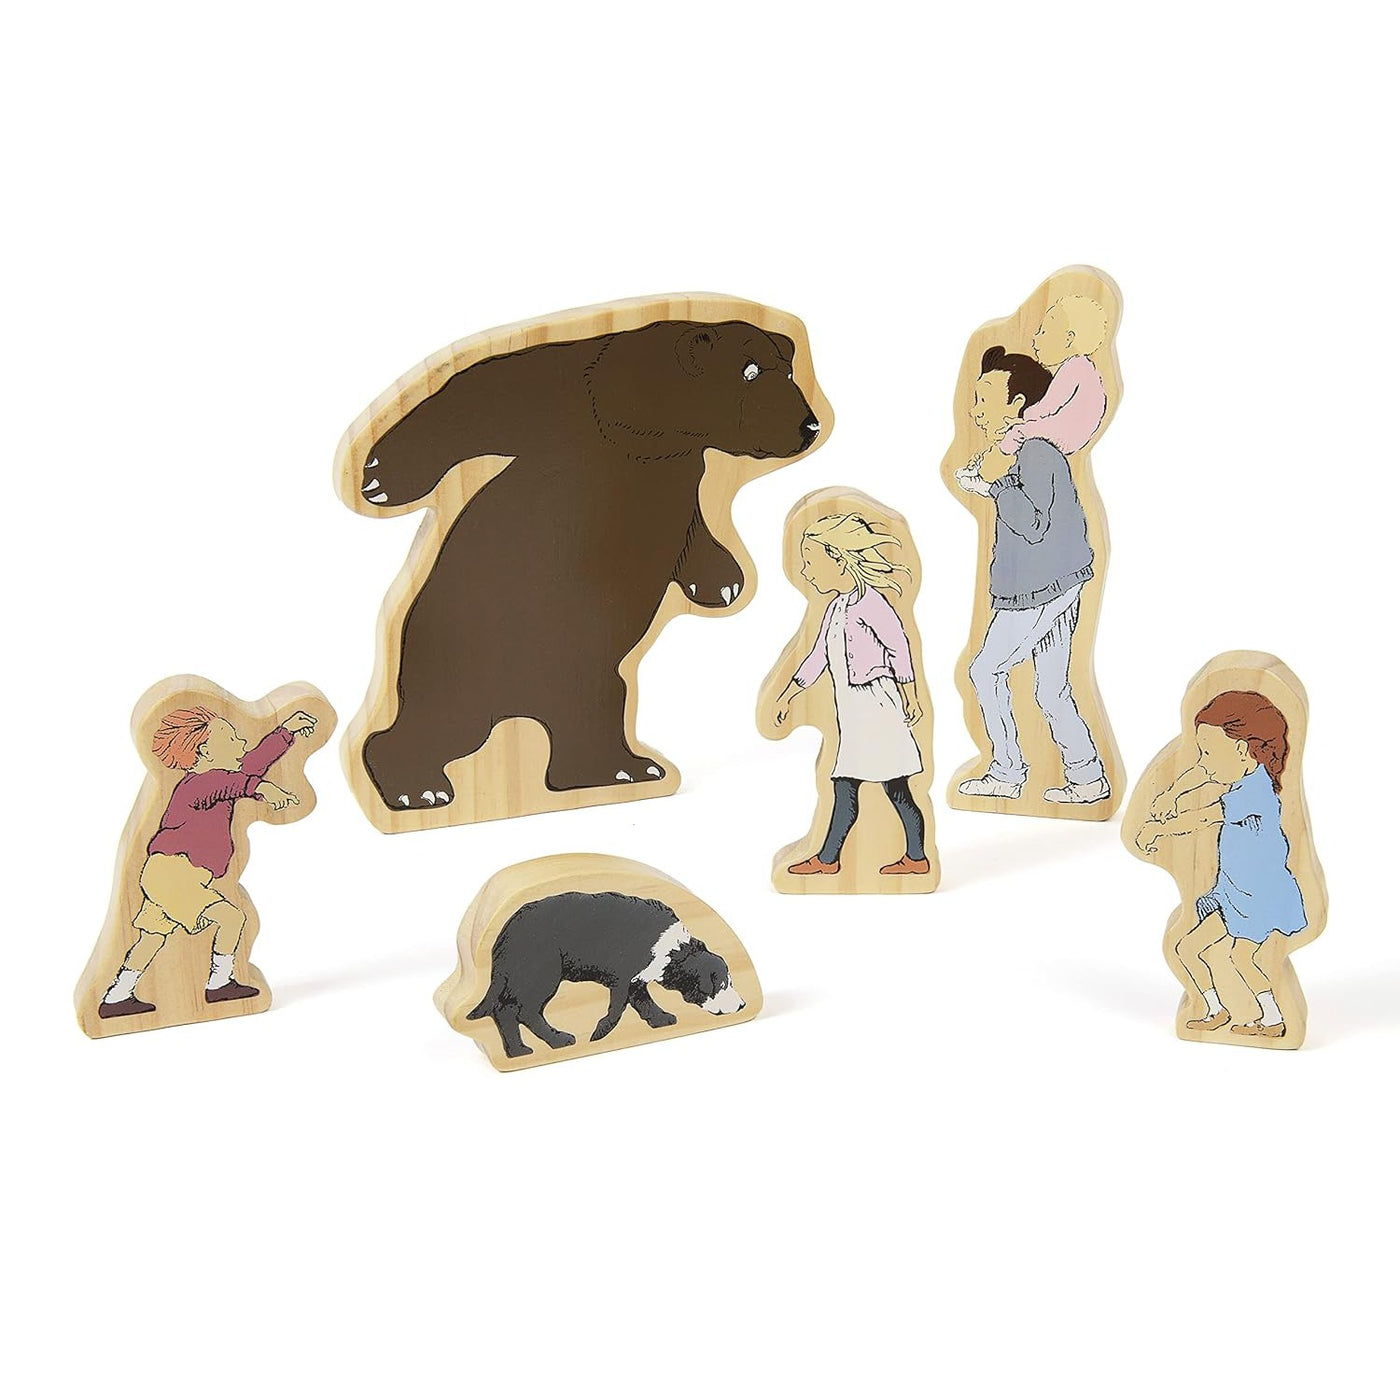 We're Going on a Bear Hunt Wooden Characters